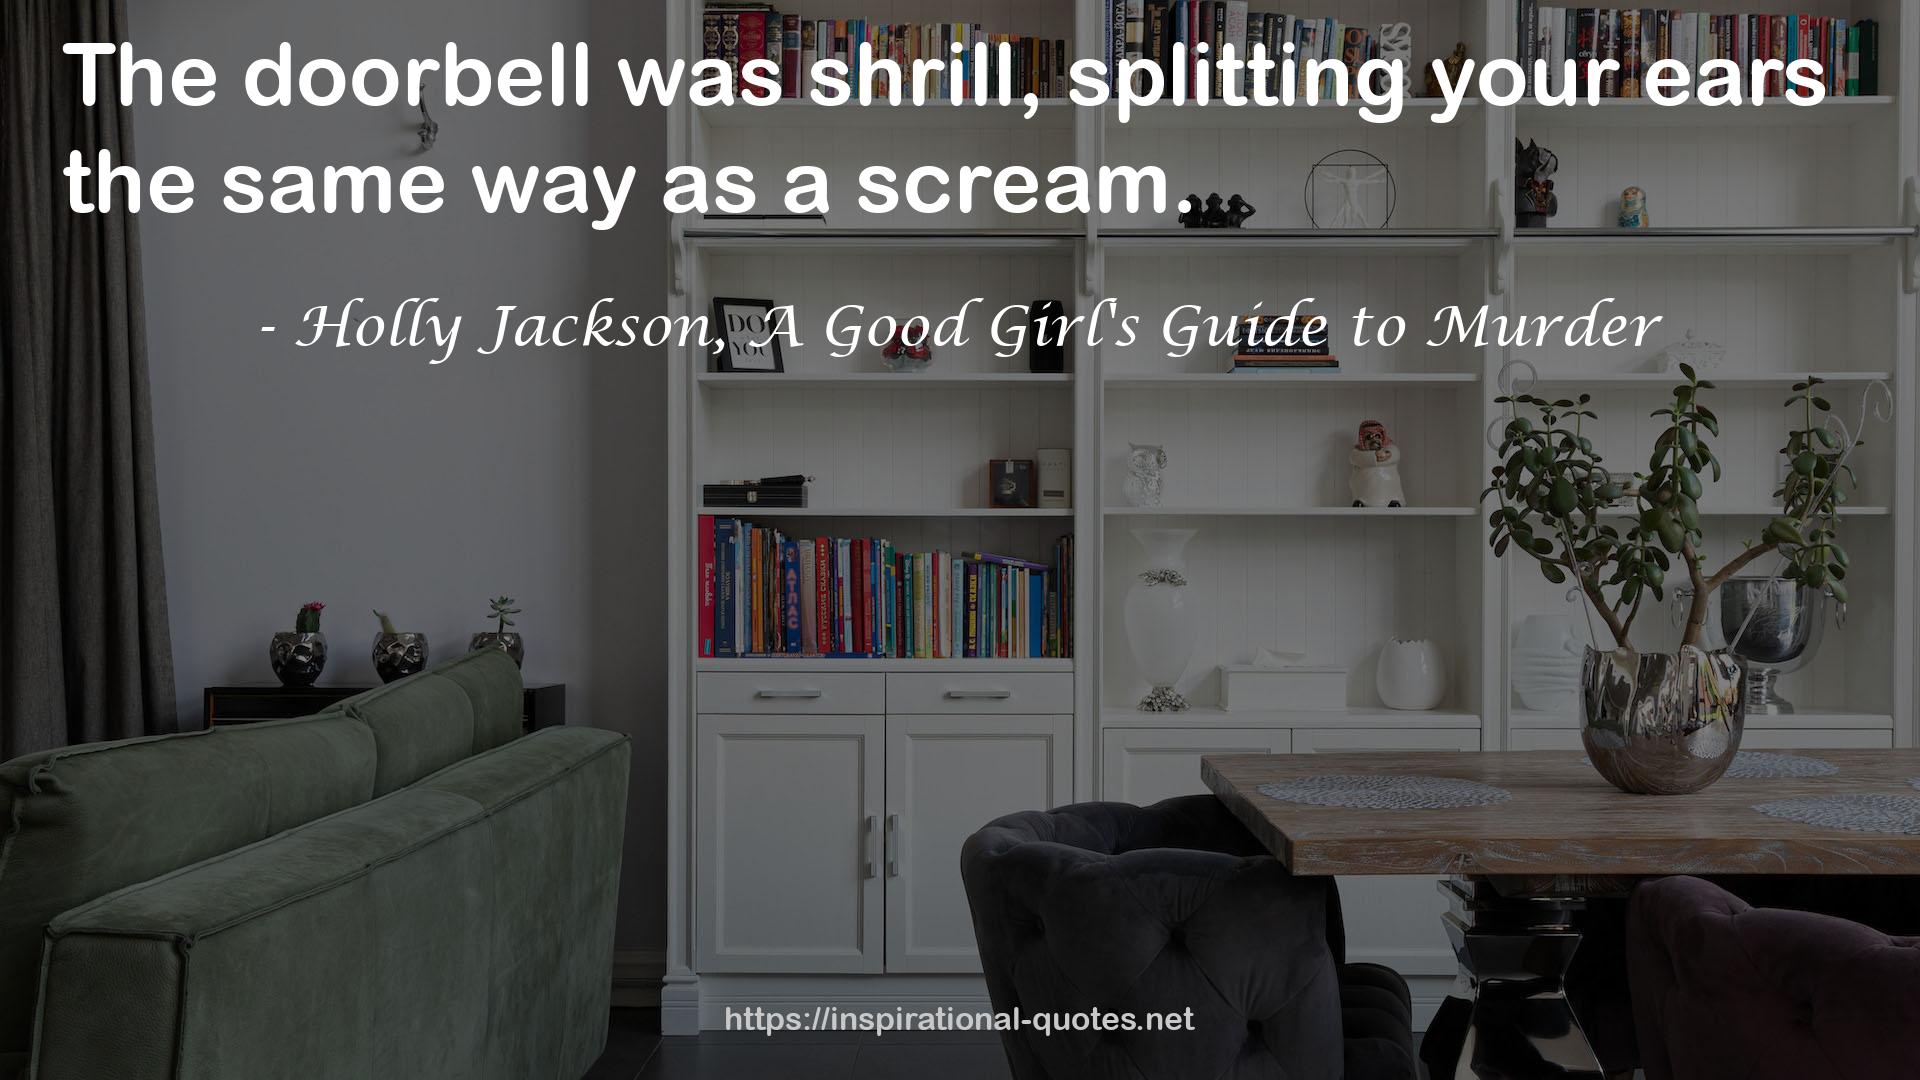 Holly Jackson, A Good Girl's Guide to Murder QUOTES